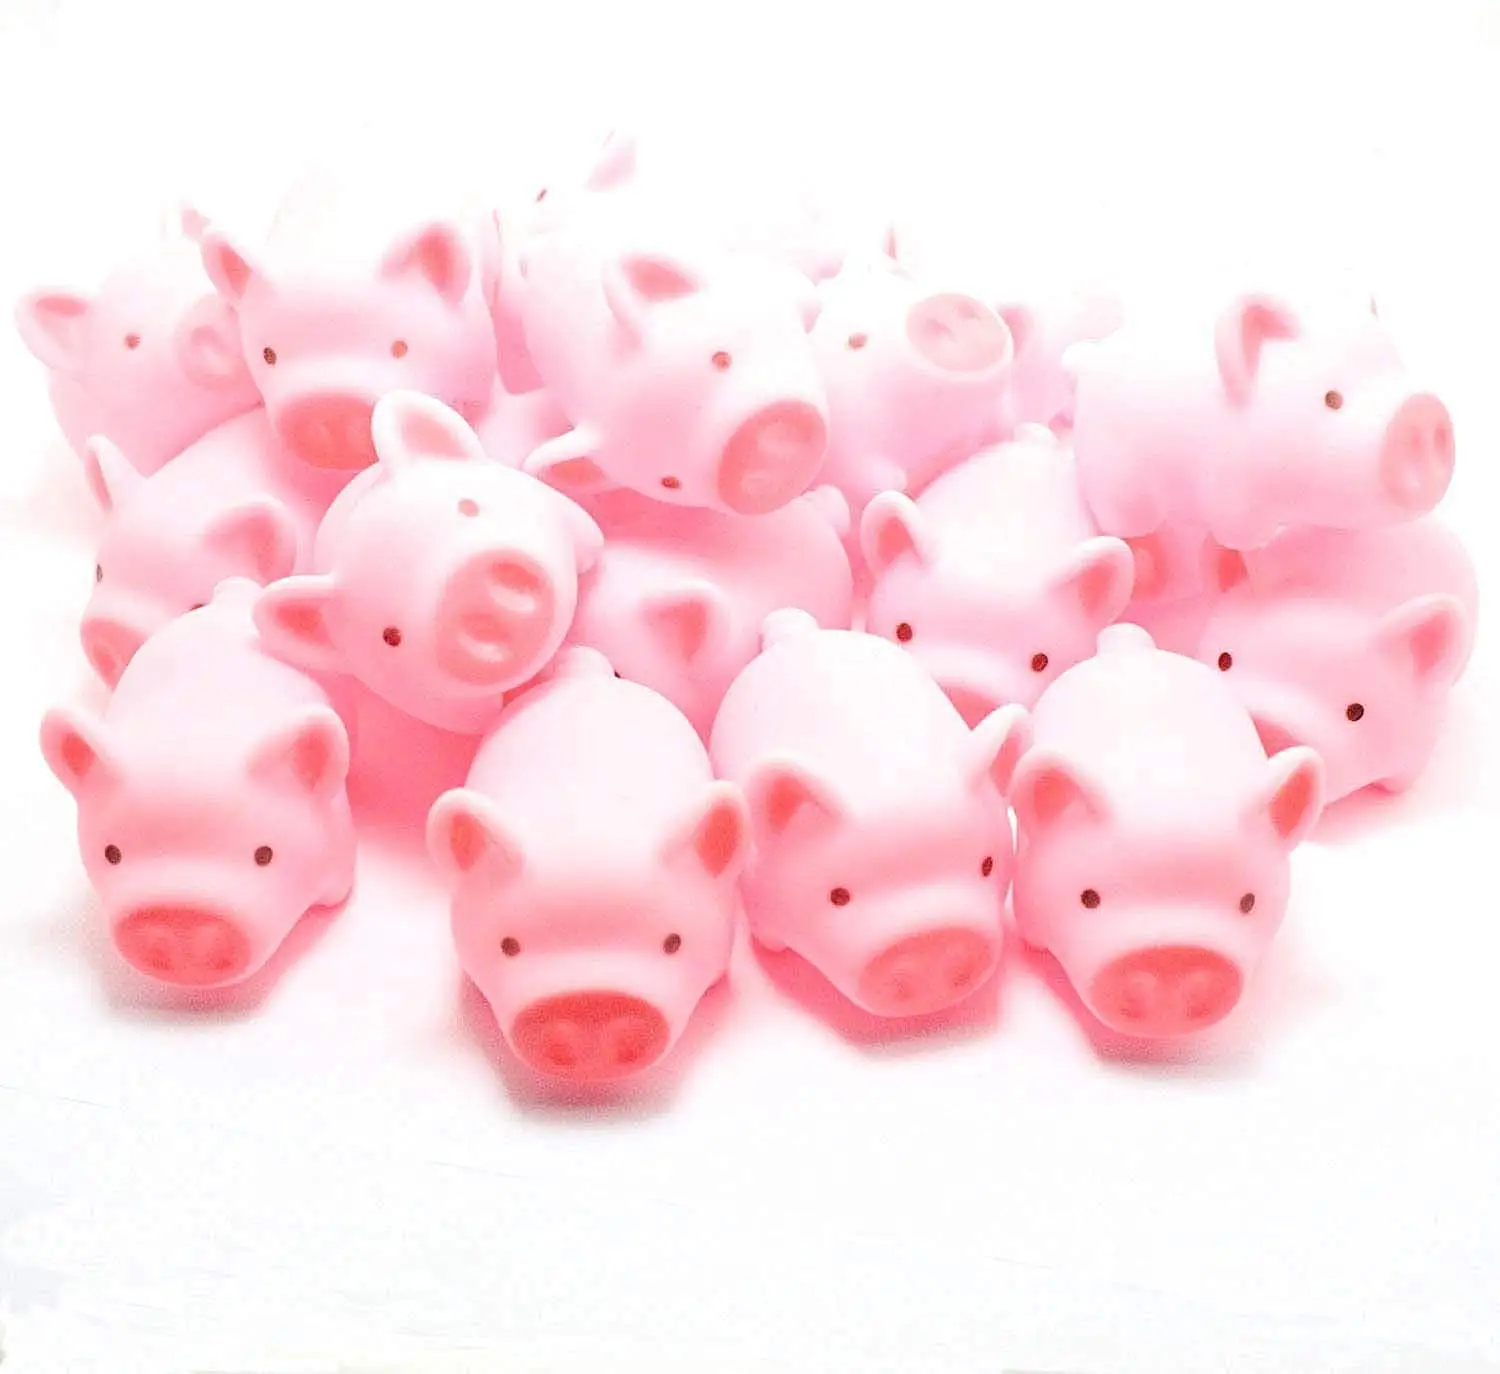 Baby Bath Toys Educational Cognitive Floating Toy 1.5 Inch Mini Miniature Rubber Pigs